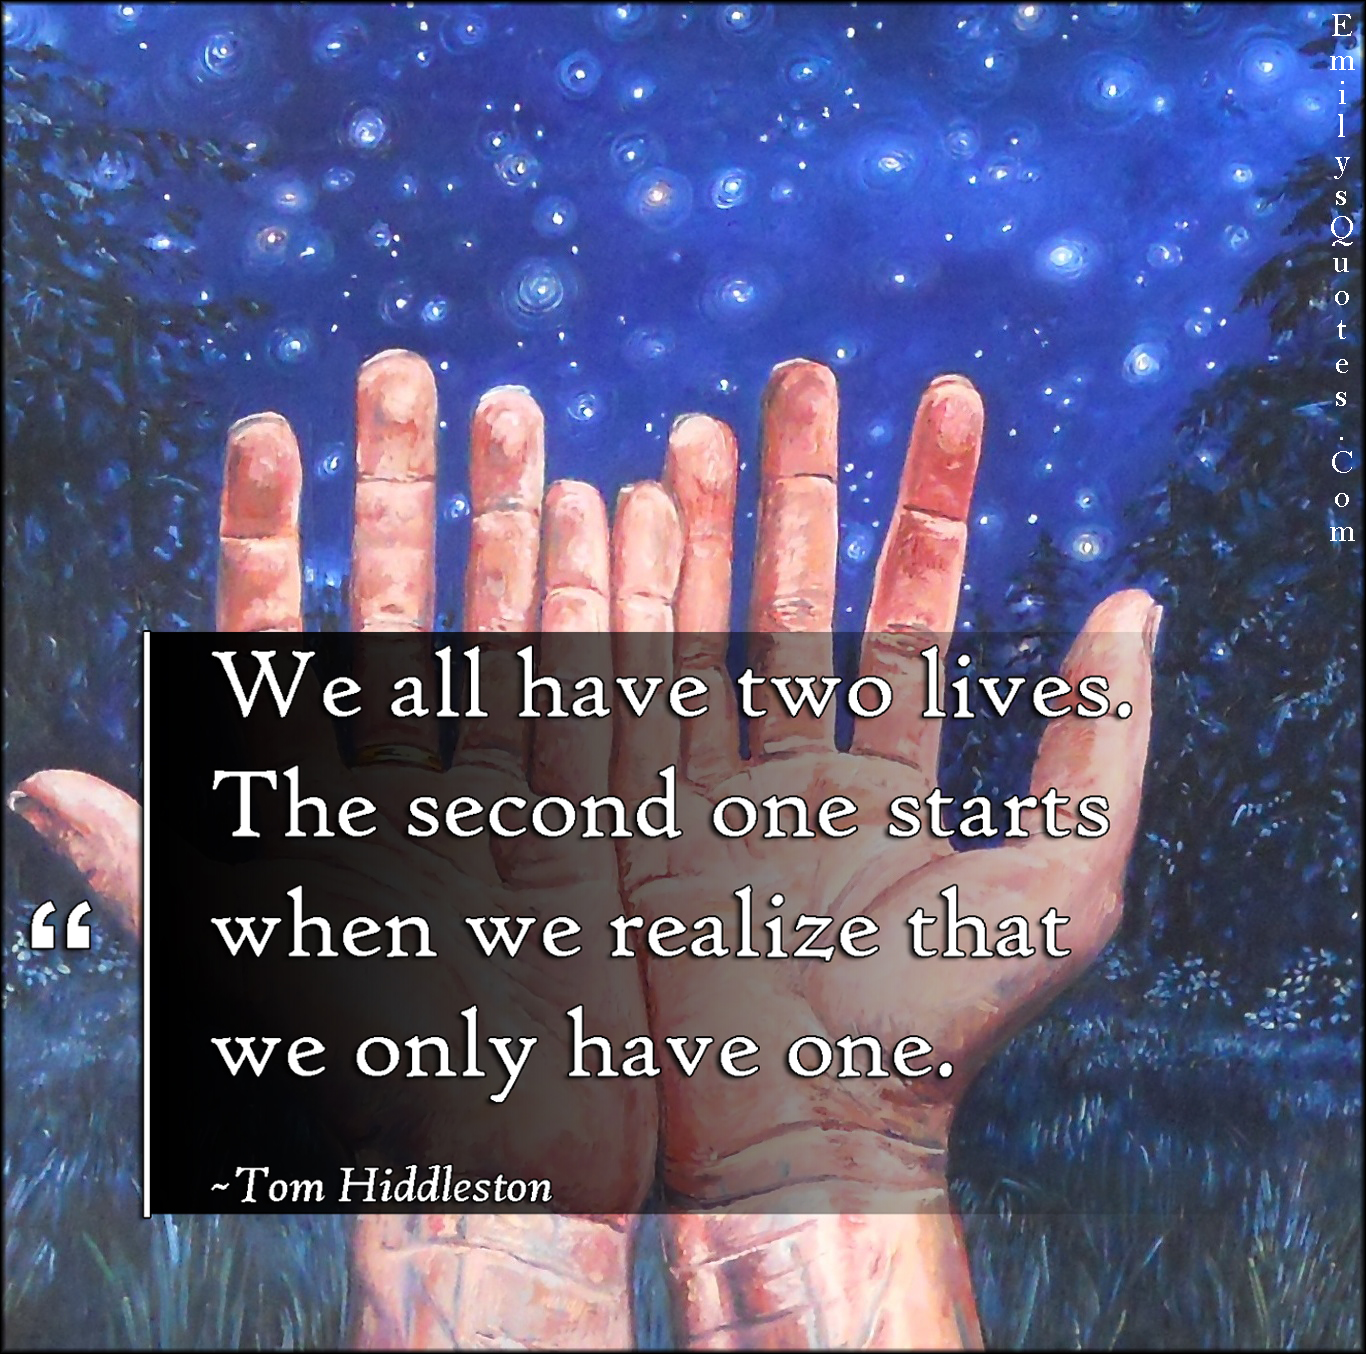 We all have two lives. The second one starts when we realize that we only have one